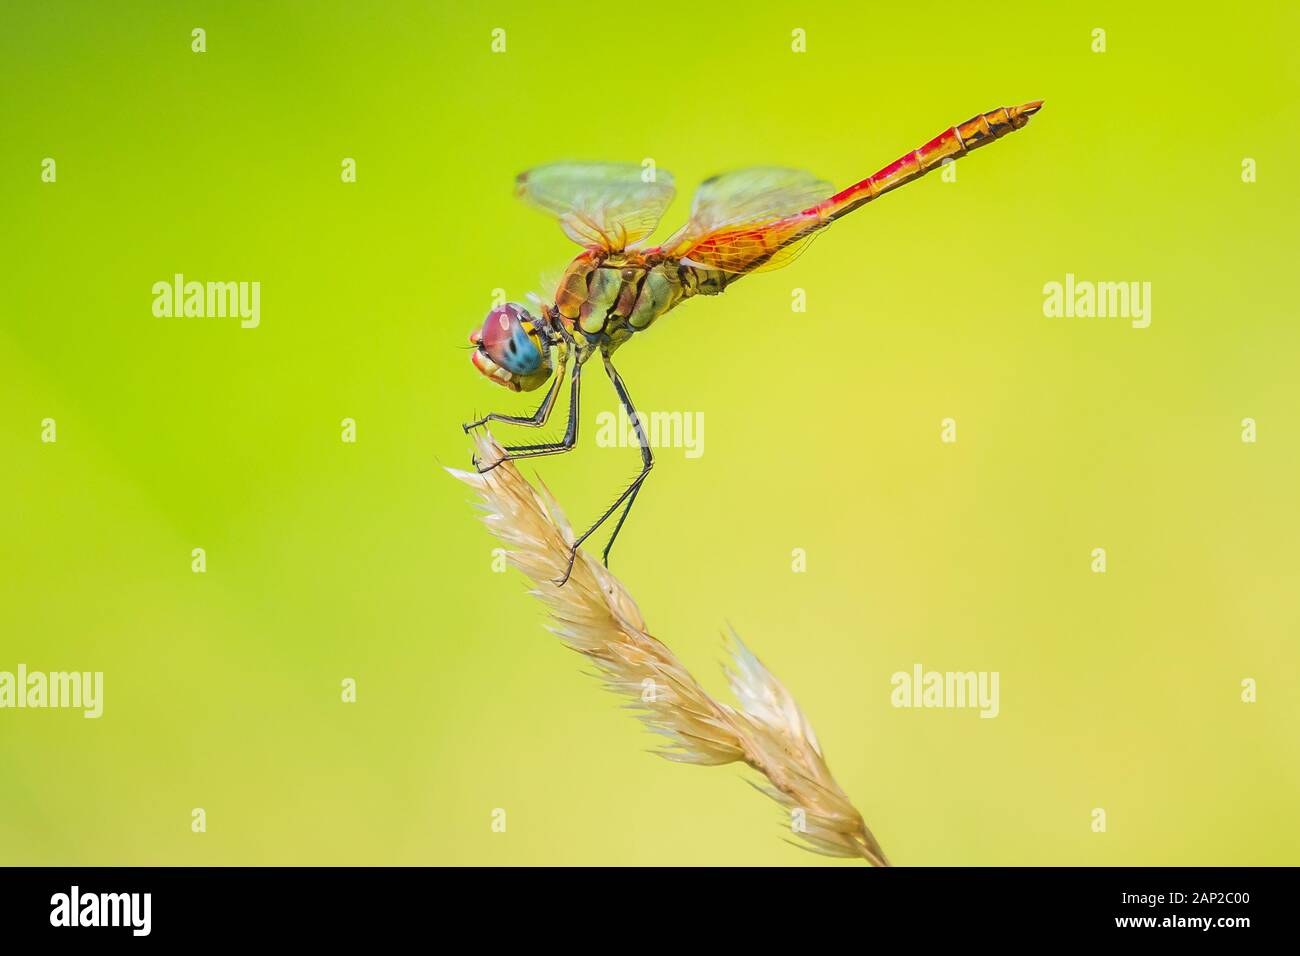 Close-up of a Sympetrum fonscolombii, Red-veined darter or nomad resting on vegetation Stock Photo